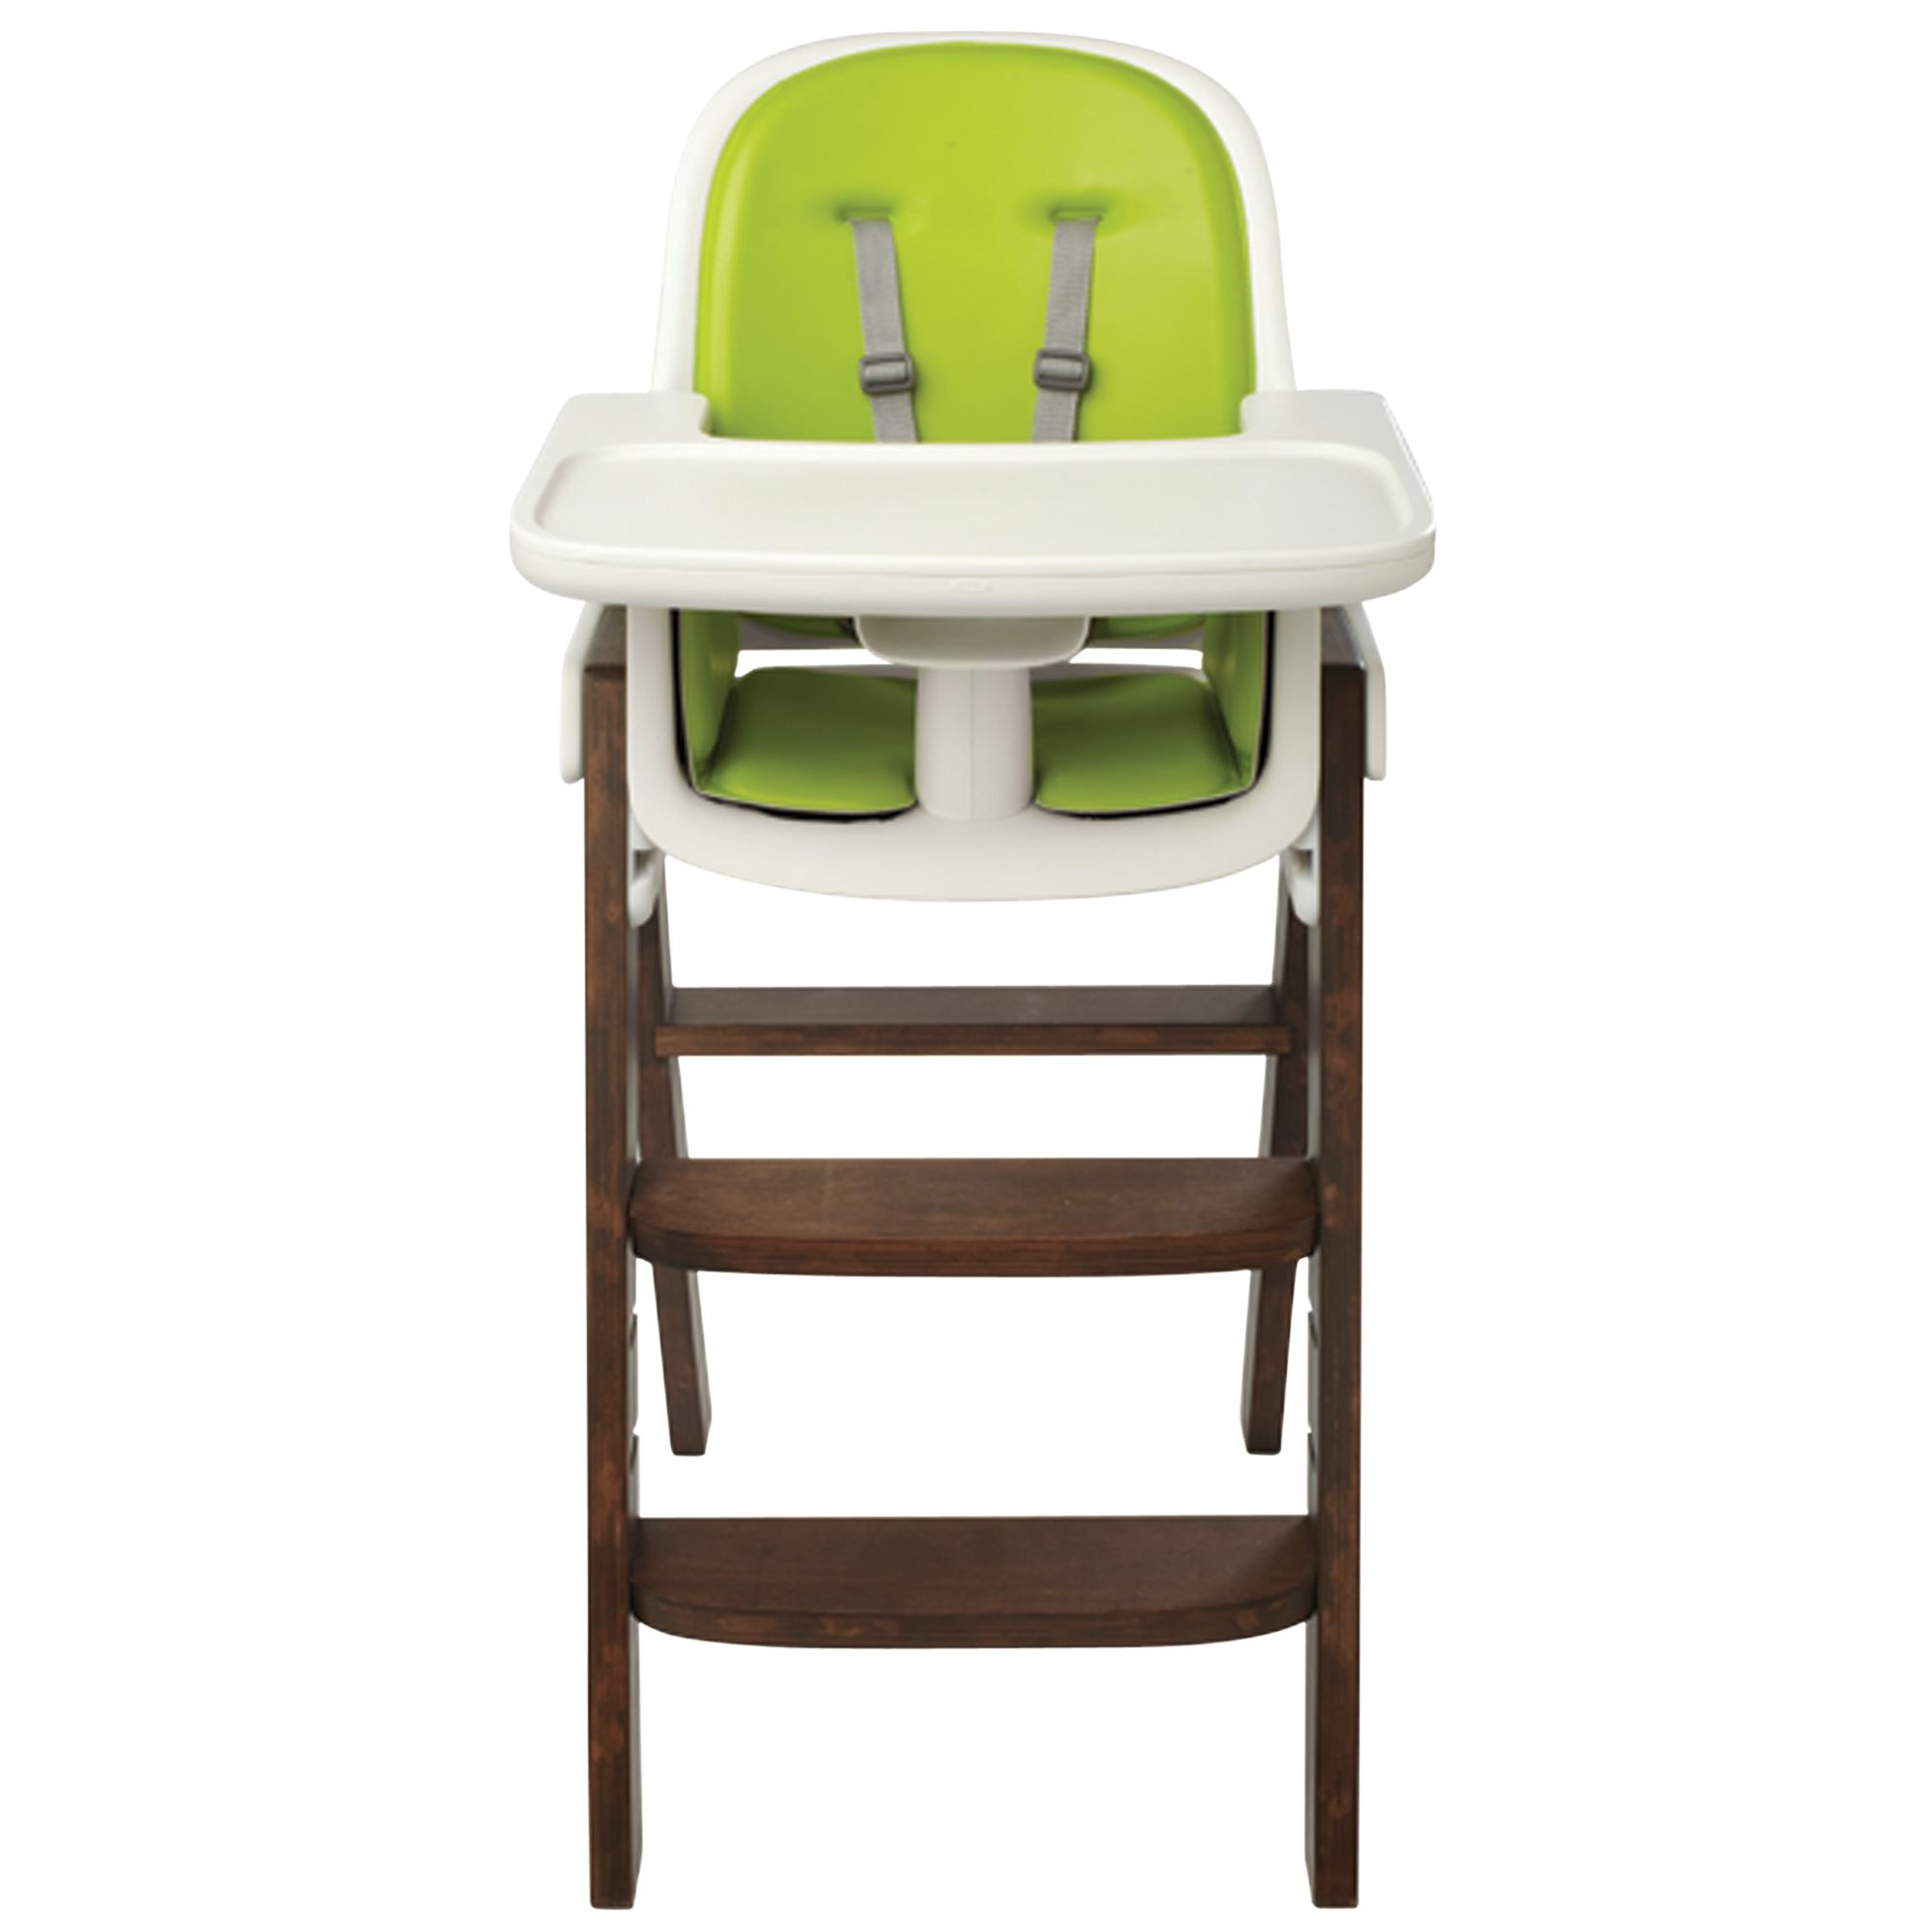 Sprout Highchair, Green/White